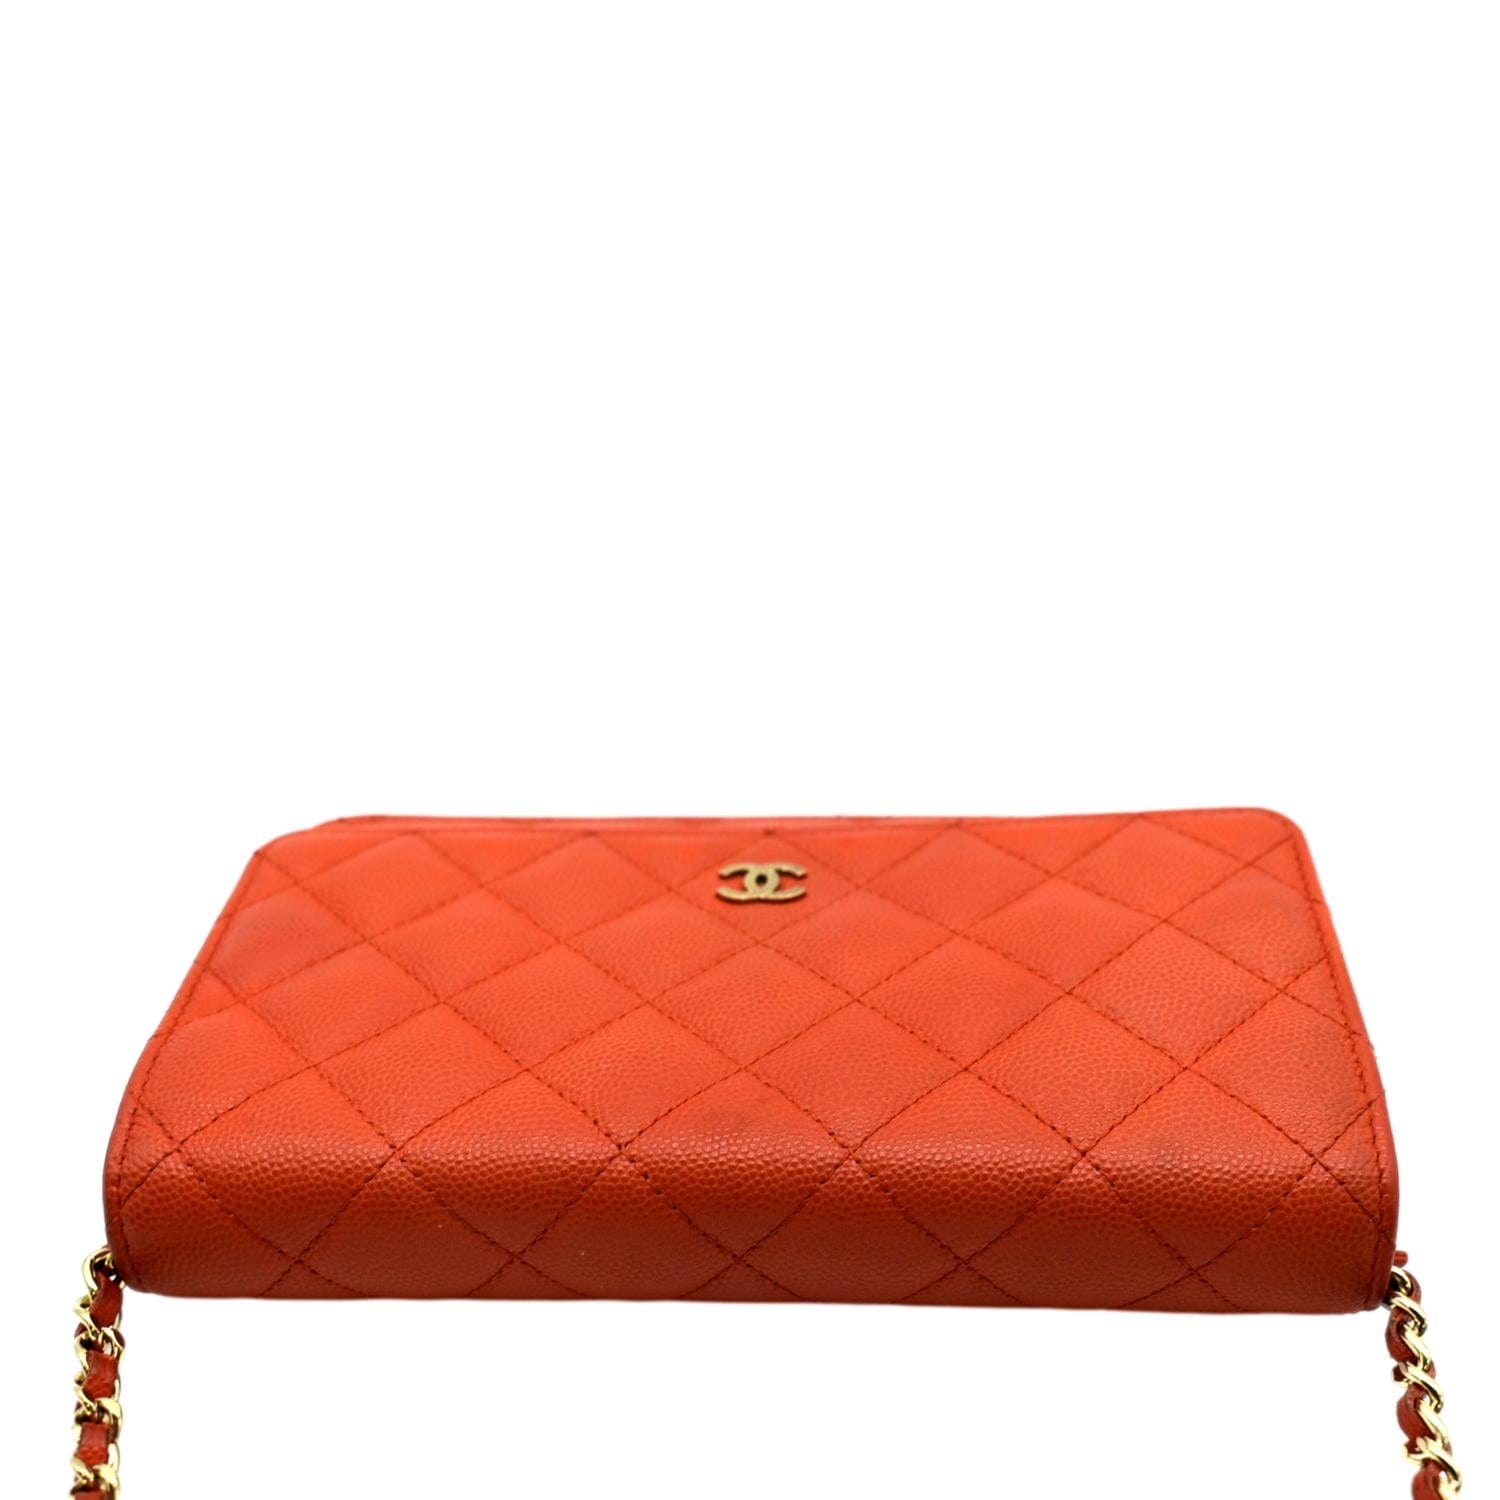 CHANEL WOC (WALLET ON CHAIN) IN RED CAVIAR LEATHER - Still in fashion